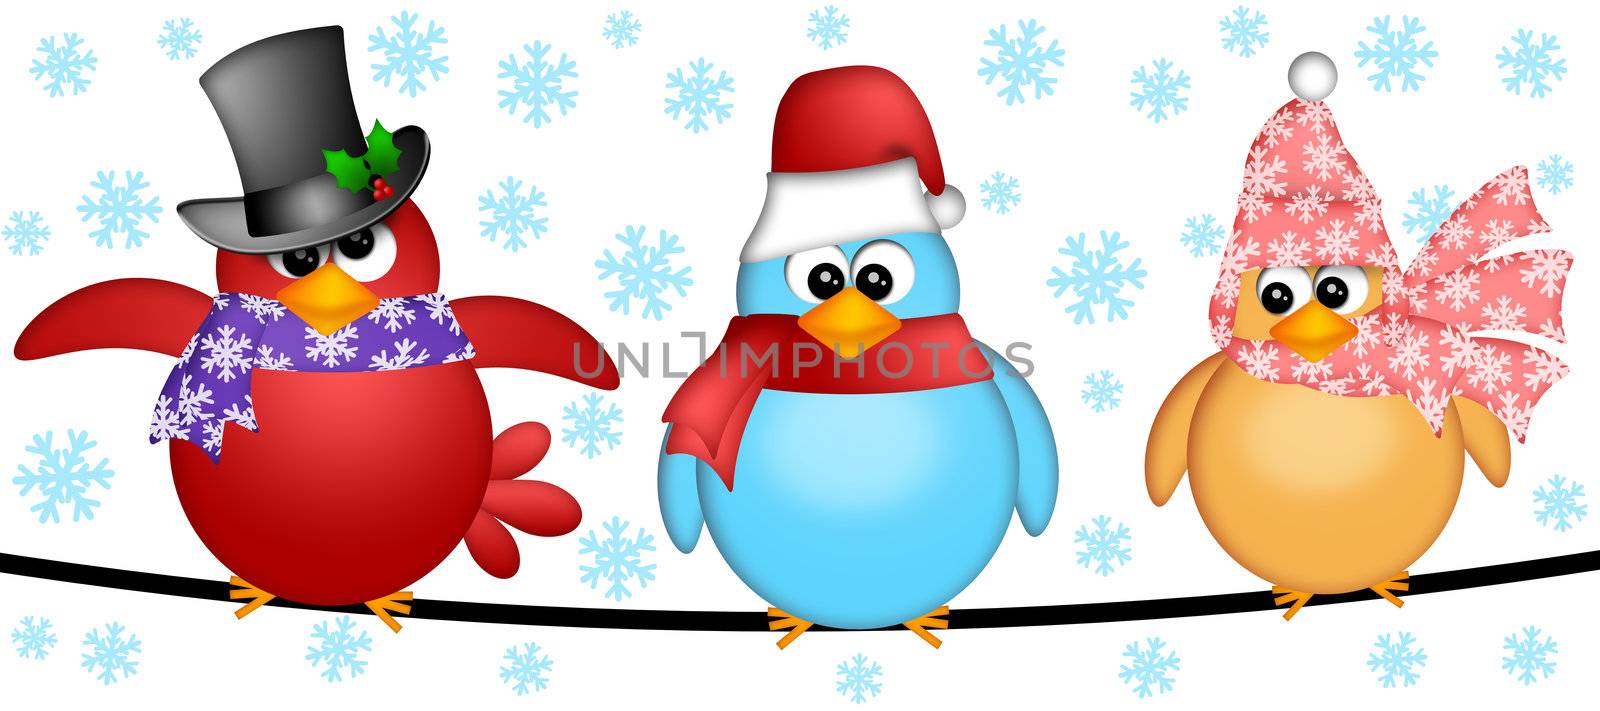 Three Christmas Birds on  a Wire Cartoon Clipart Illustration Isolated on White Background with Snowflakes